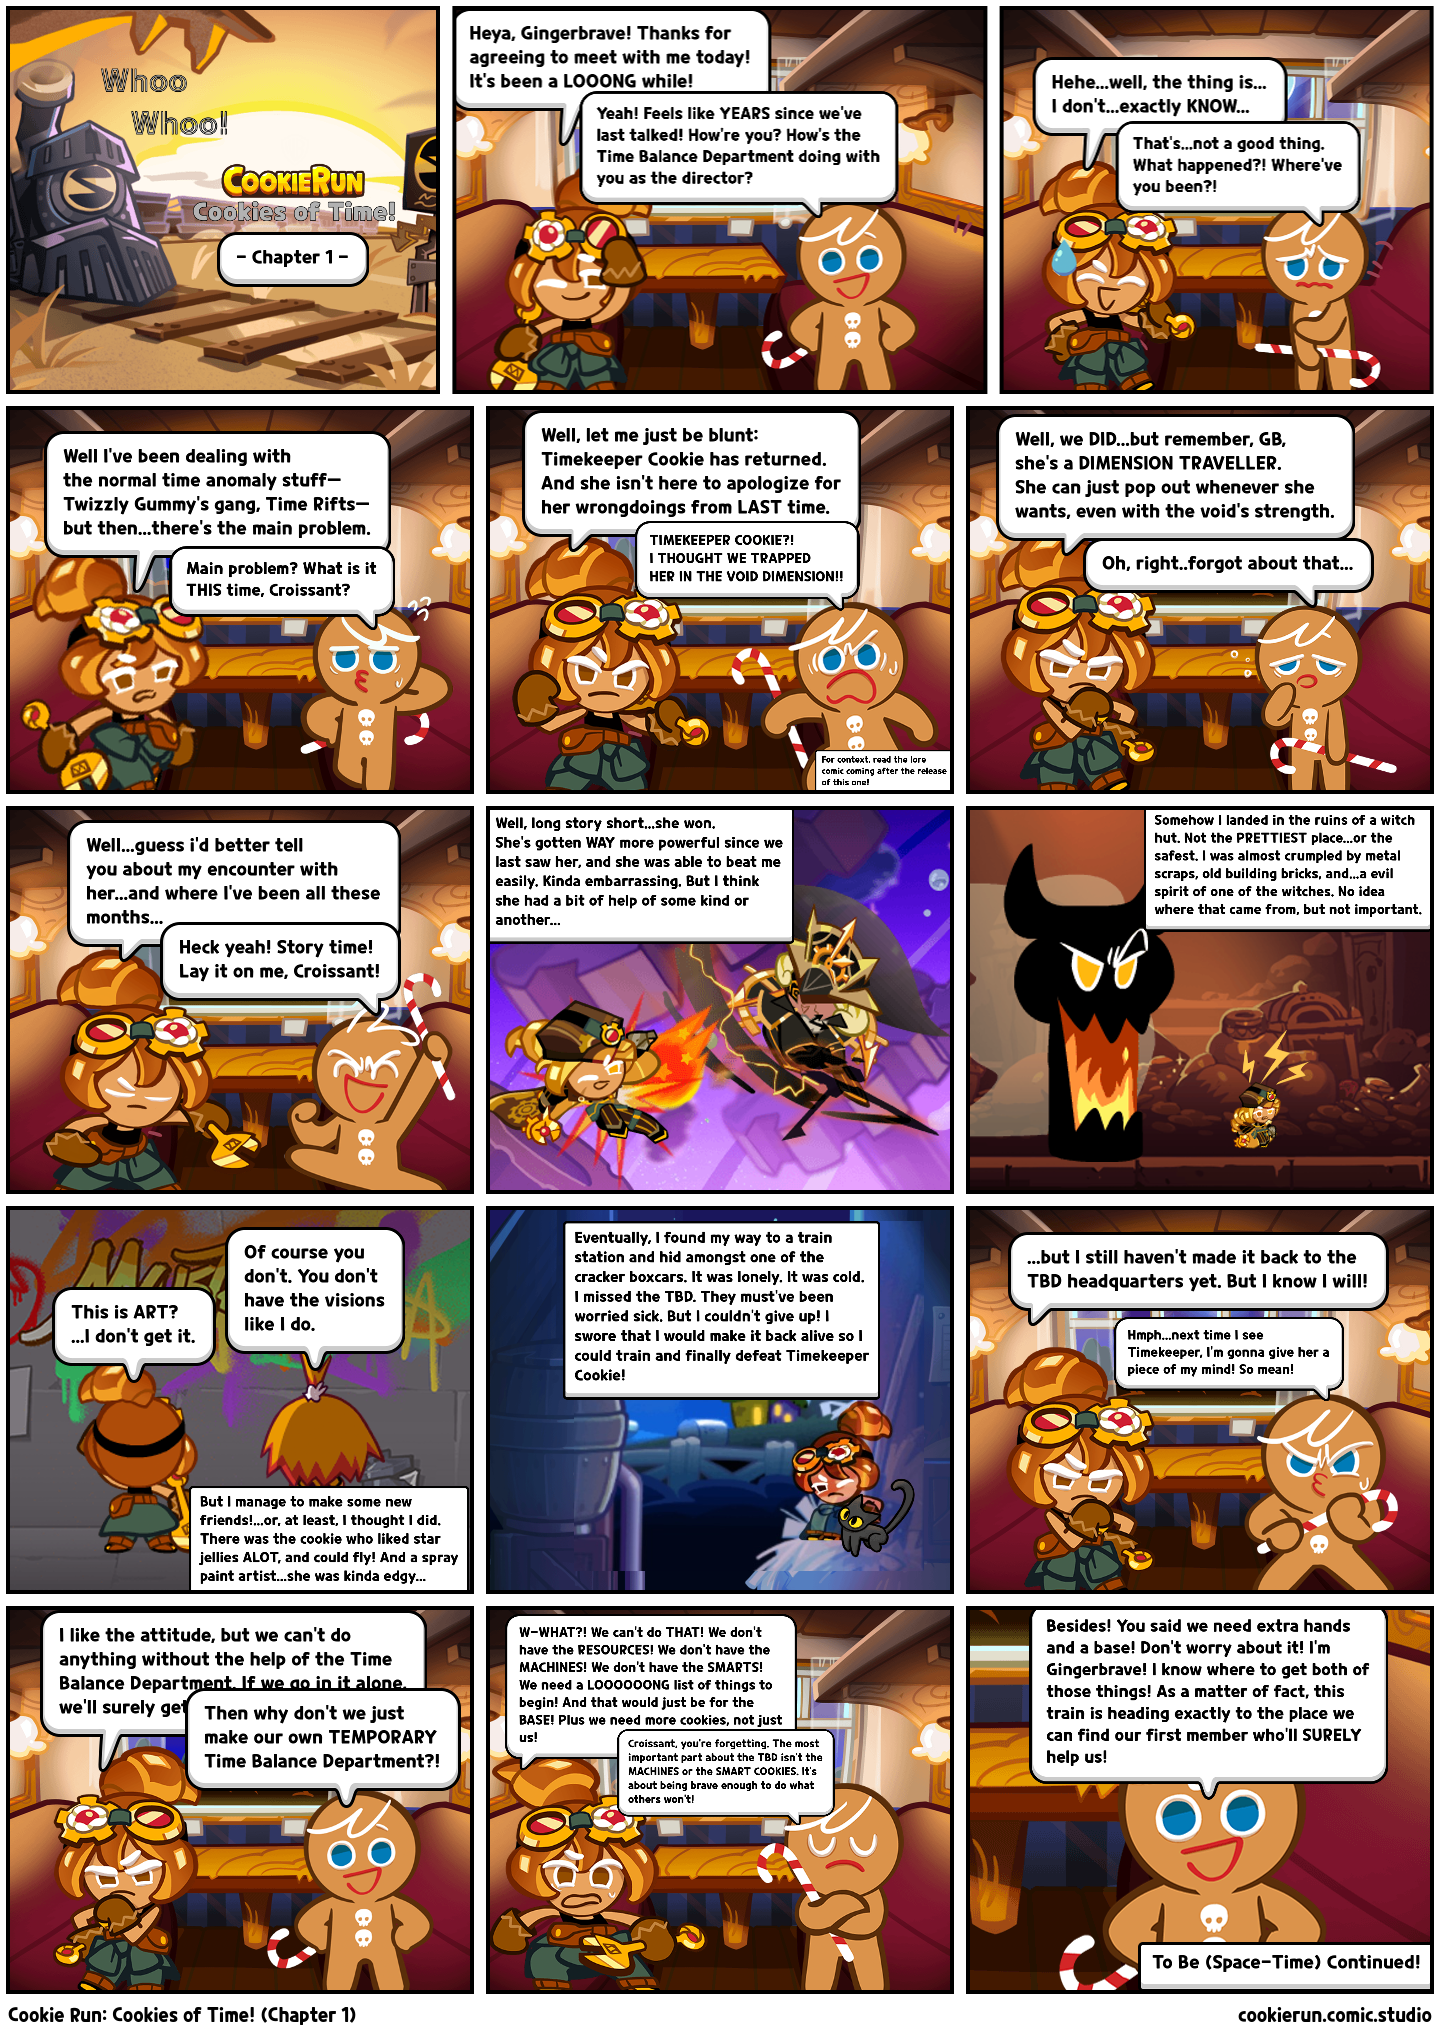 Cookie Run: Cookies of Time! (Chapter 1)